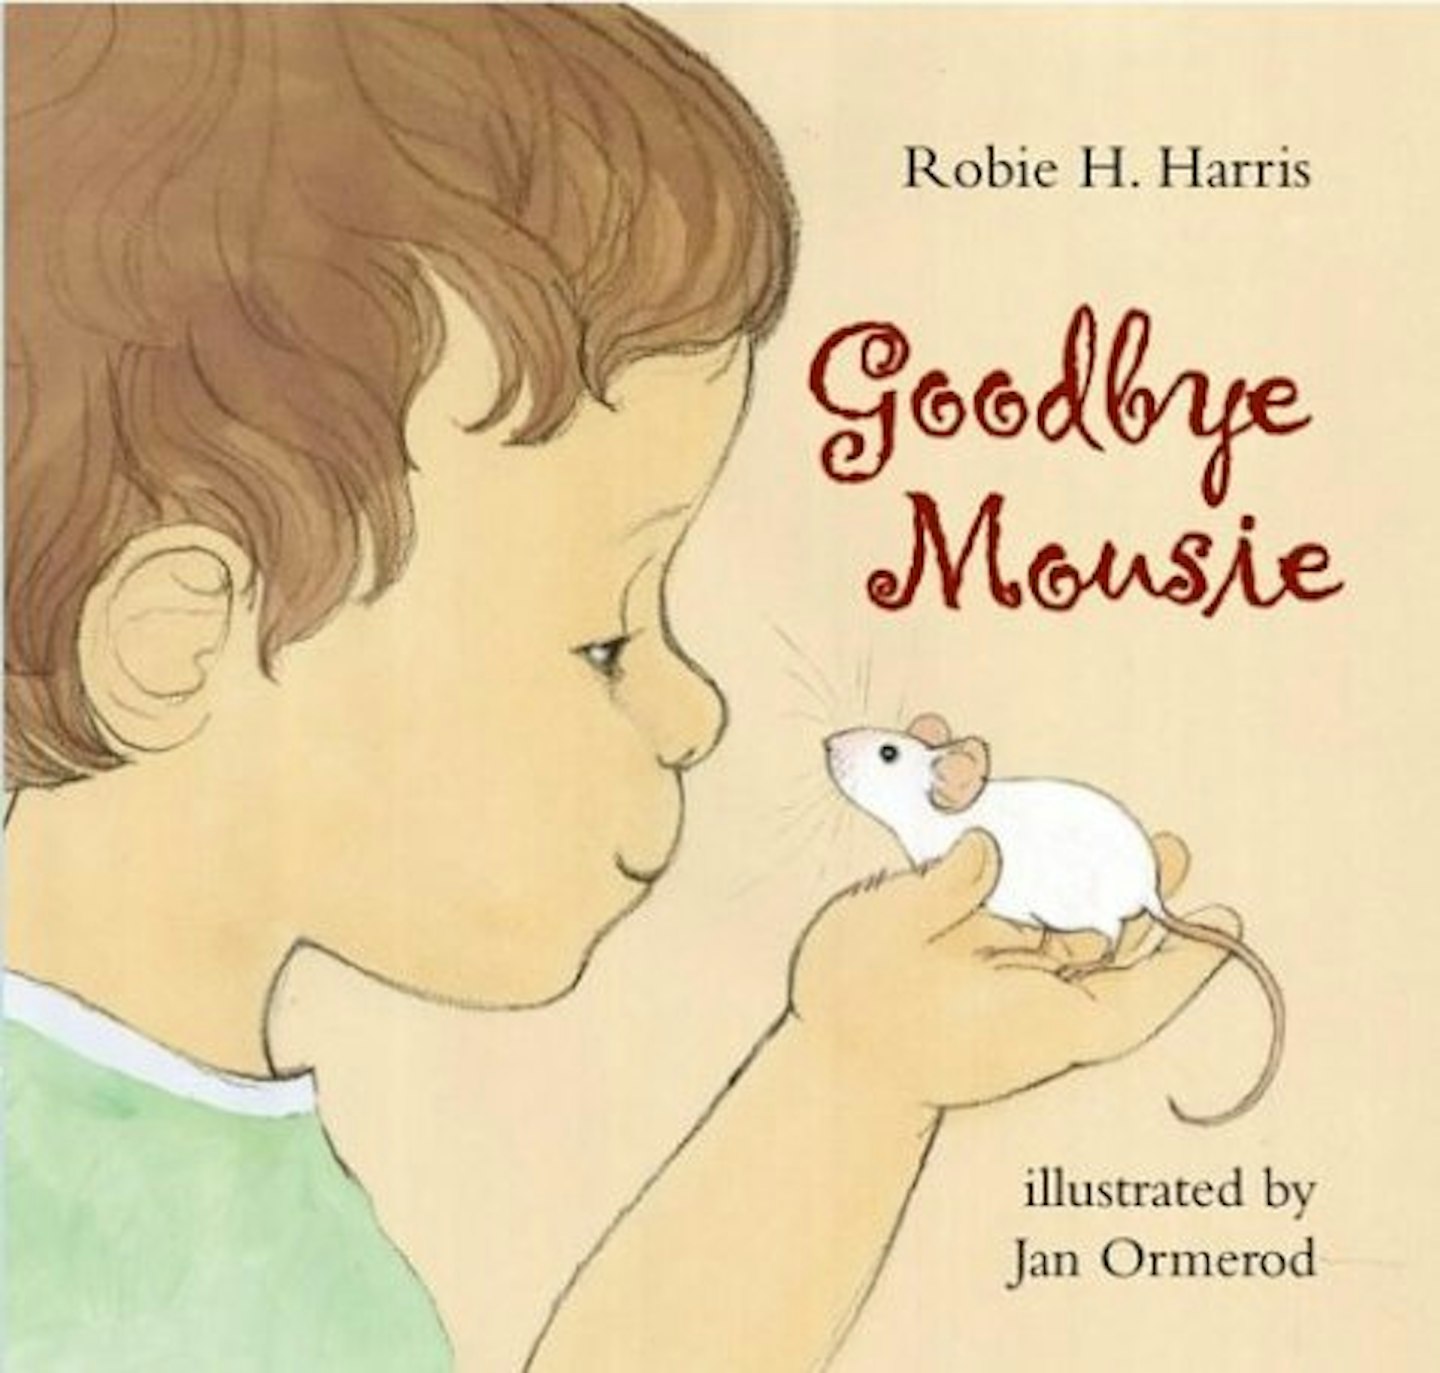 Goodbye Mousie by Robie H. Harris and Jan Omerod